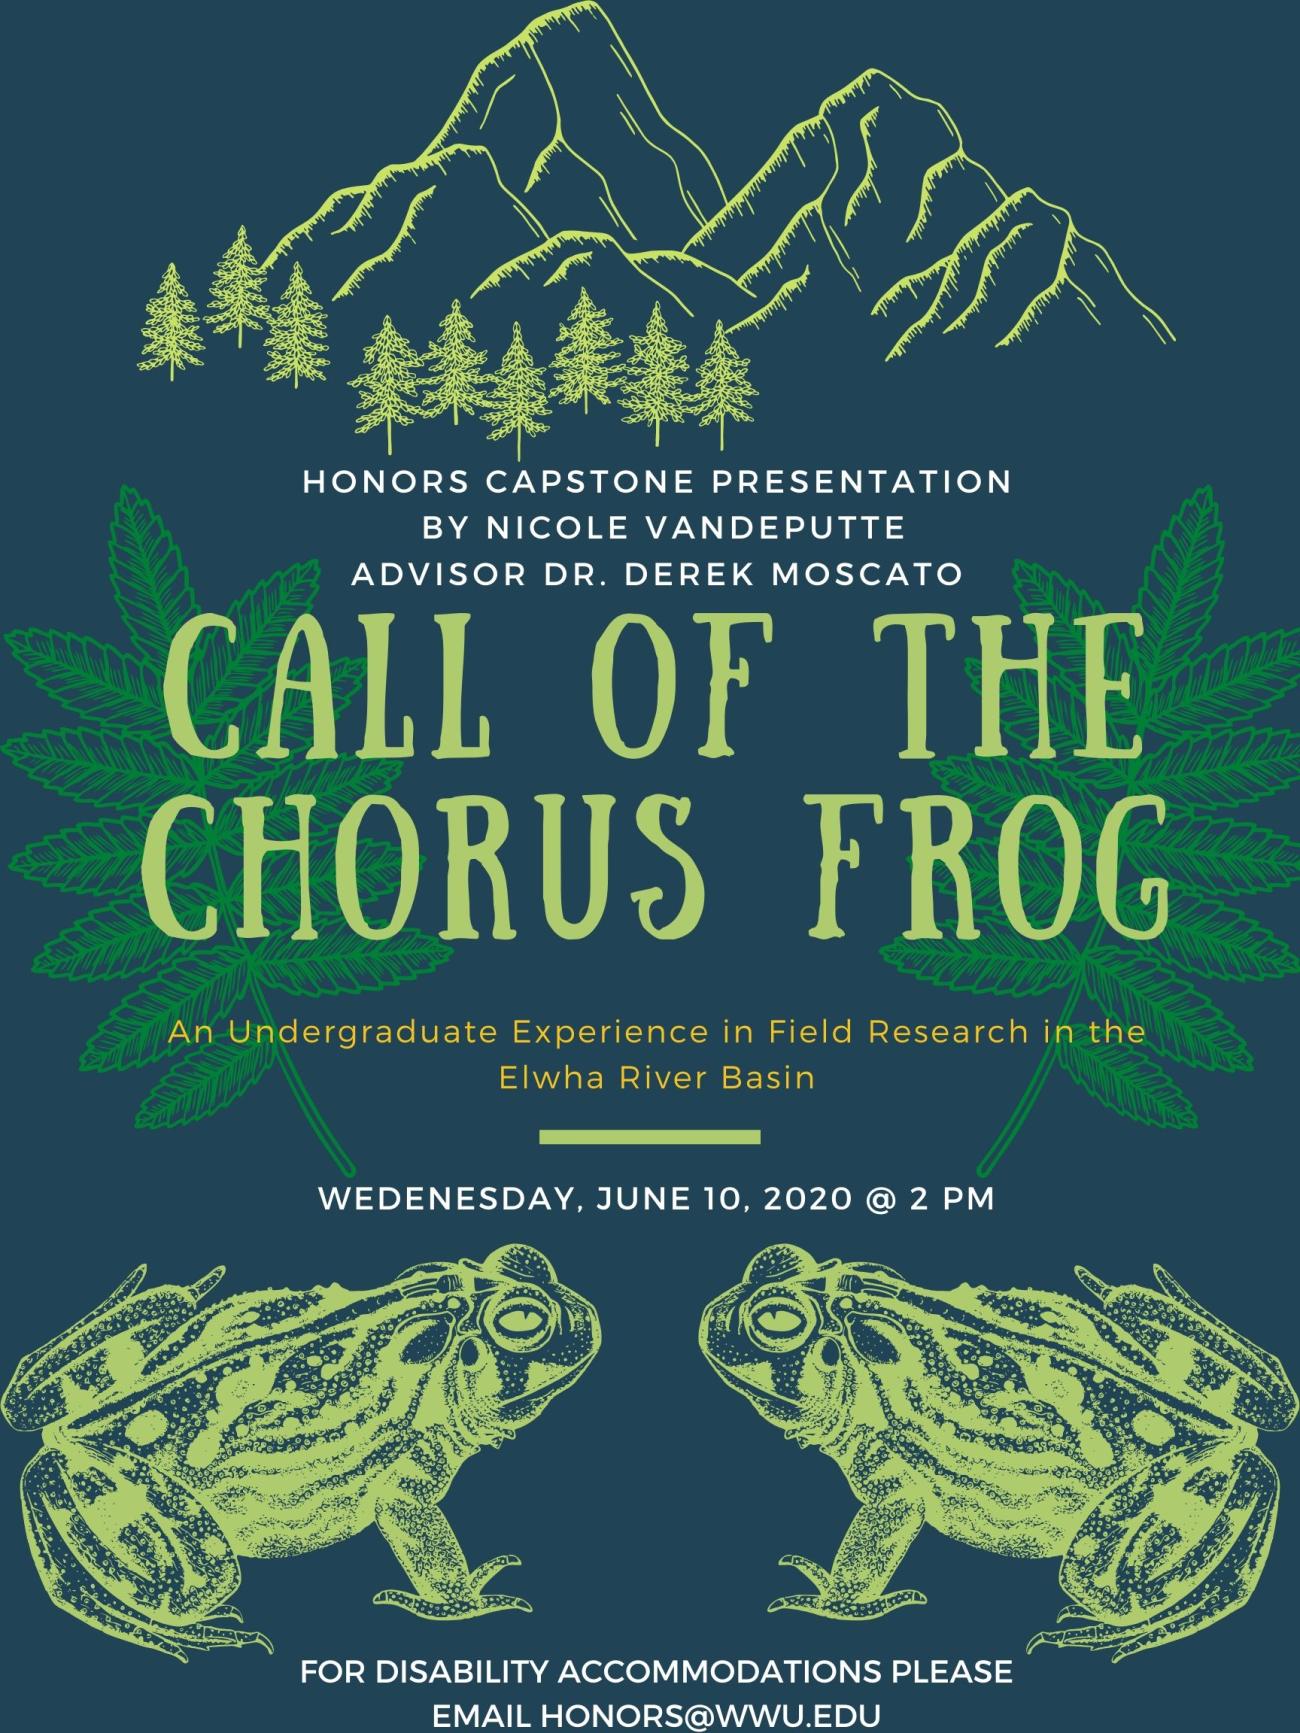 Images: Mountains, fern leaves, and frogs. Text reads: "Honors Capstone Presentation by Nicole VandePutte Advisor Dr. Derek Moscato" "Call of the Chorus Frog, an undergraduate experience in field research in the Elwha River Basin" "Wednesday, June 10, 2020 @ 2PM" "For disability accommodations please email honors@wwu.edu"